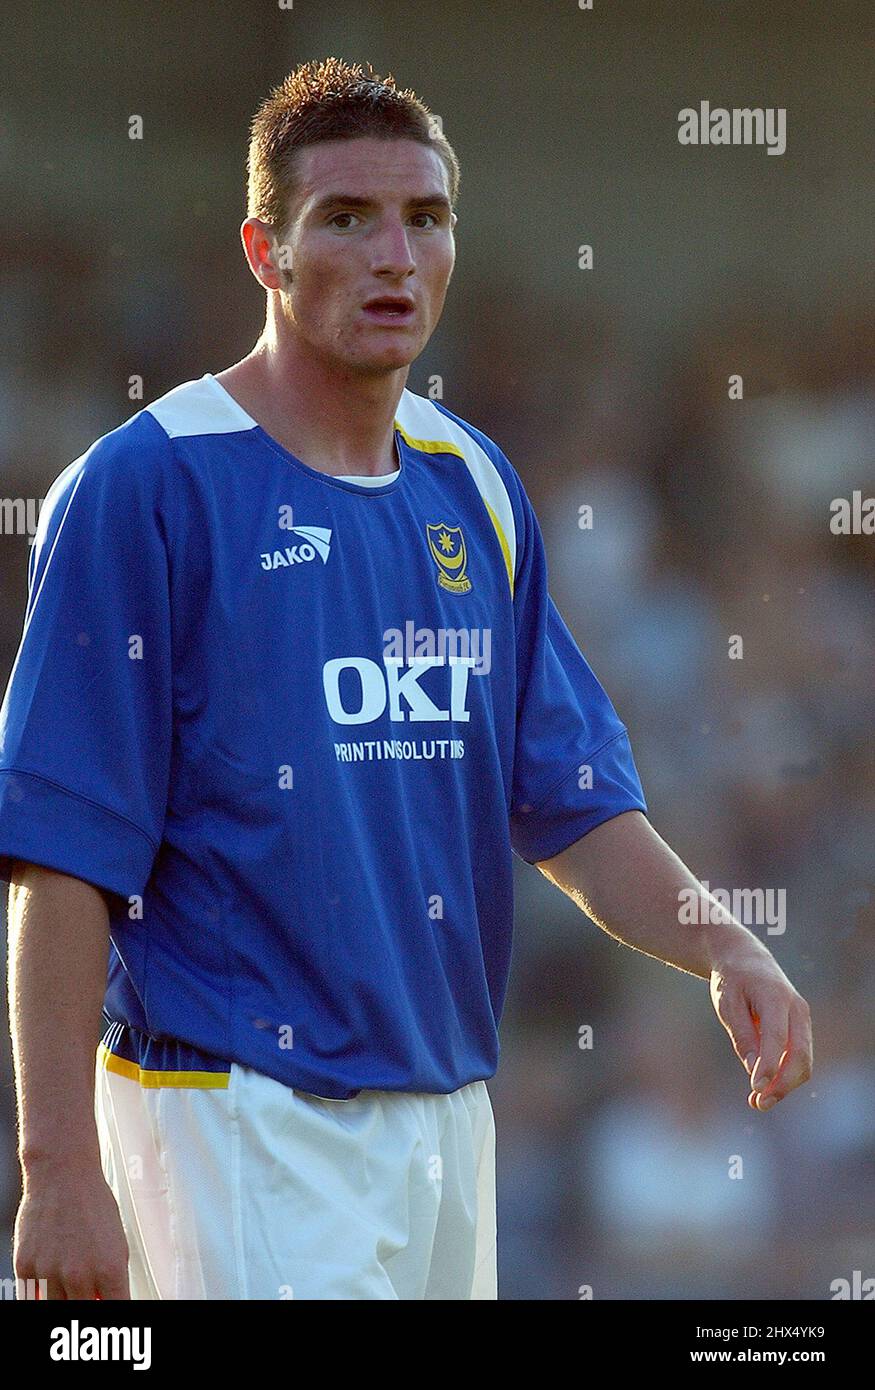 PORTSMOUTH FC JULY 2005 JAMES KEENE PIC MIKE WALKER, 2005 Stock Photo